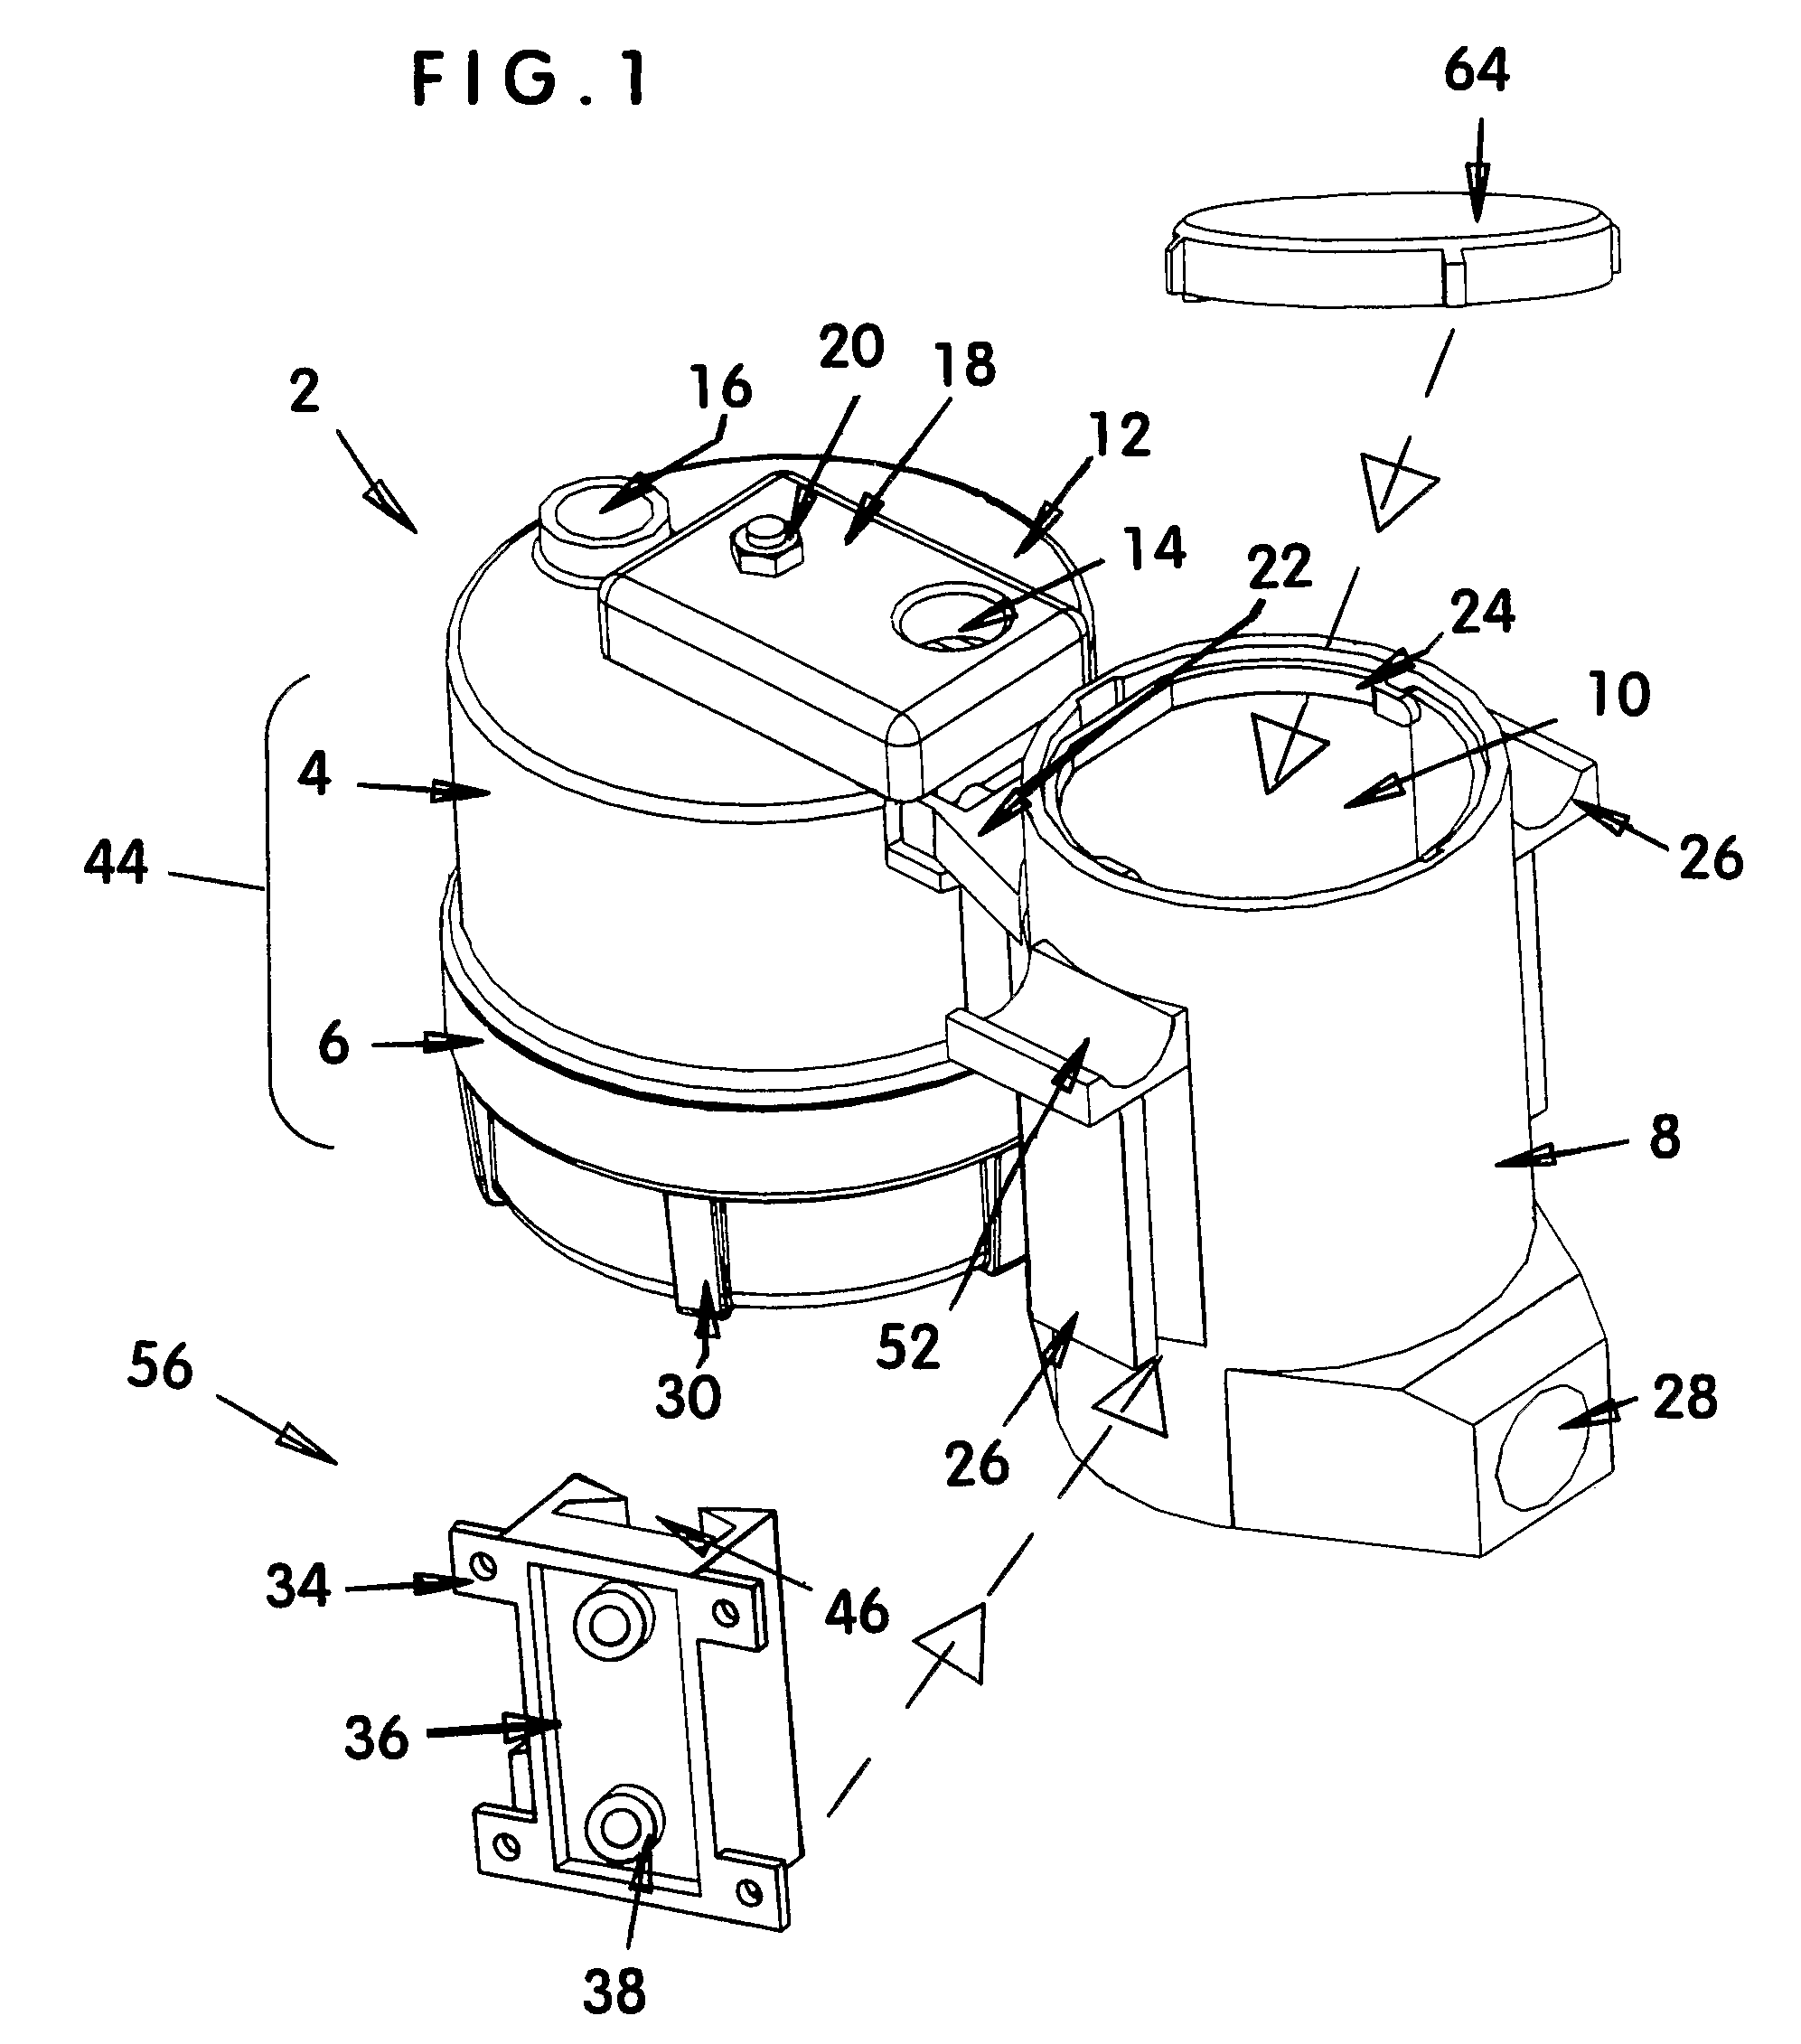 Condensate recovery and treatment system